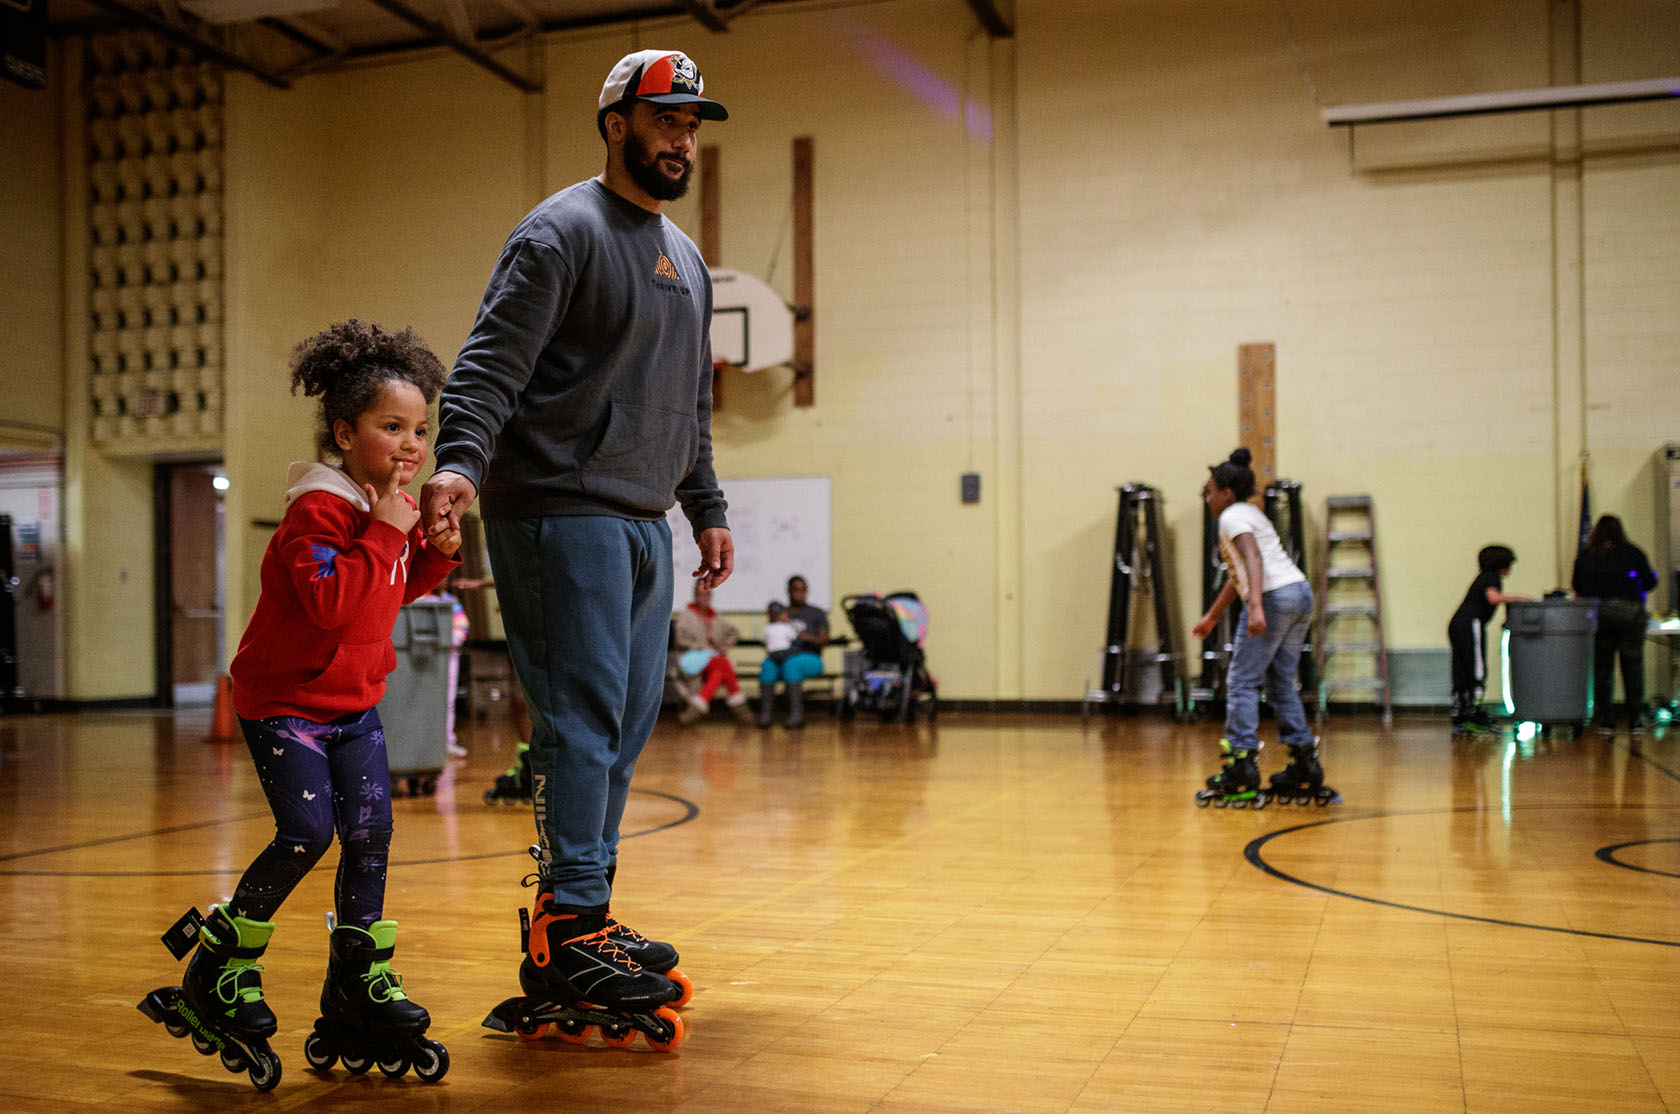 A dad and his daughter rollersjate in a school gym.